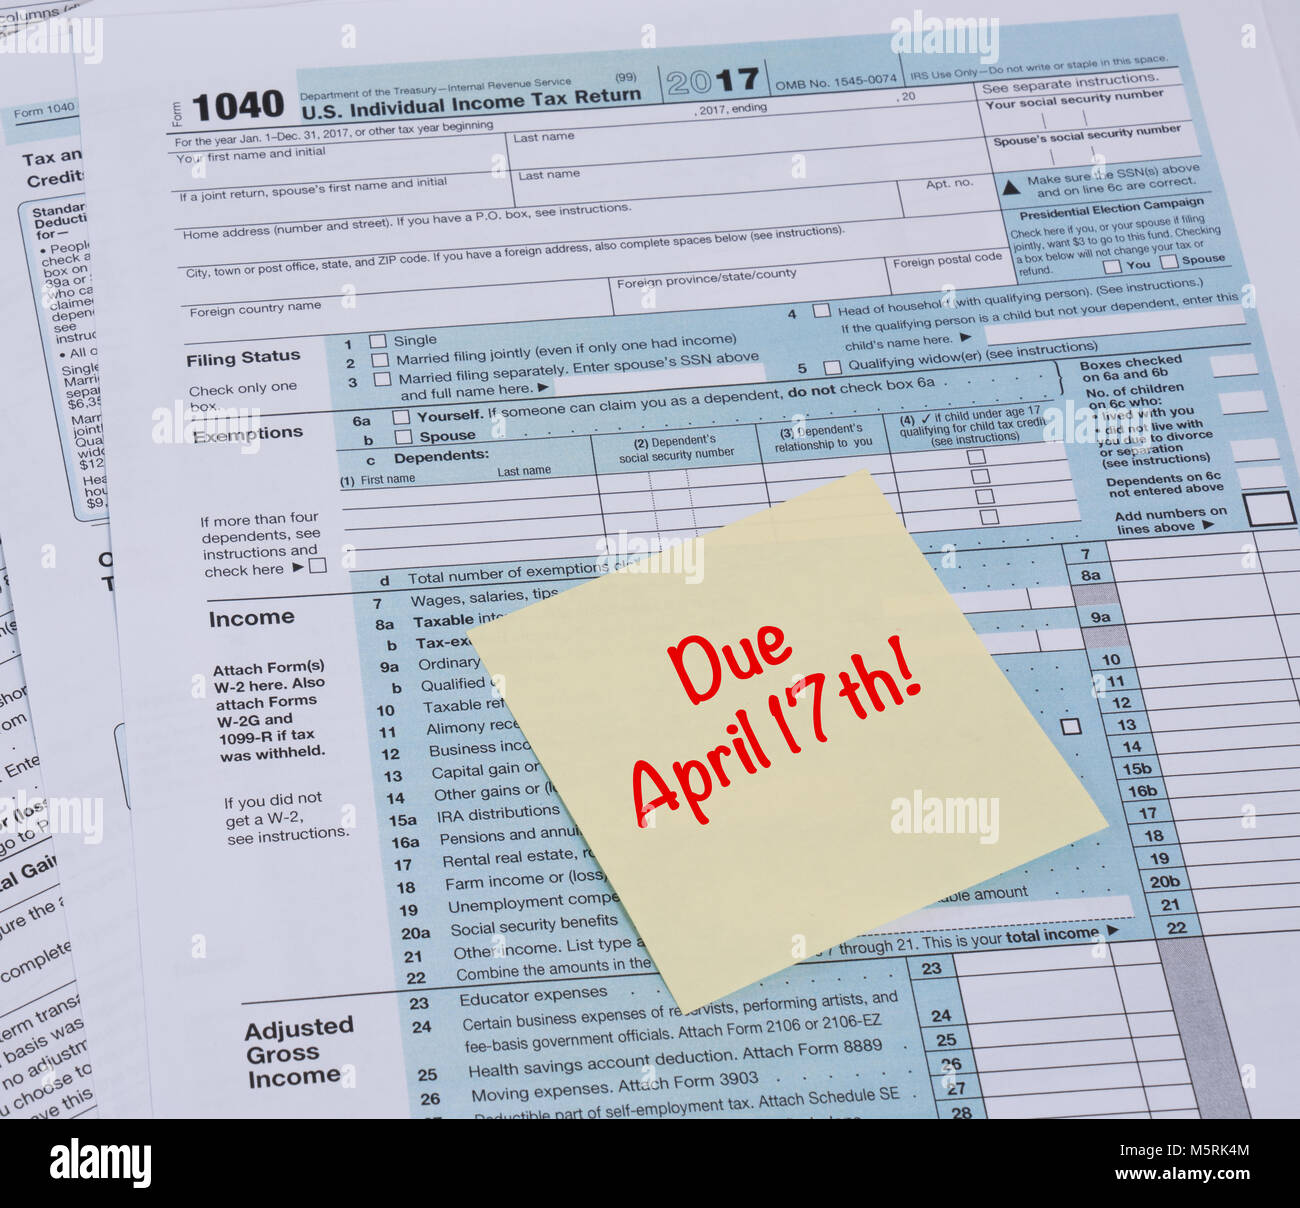 IRS 1040 Tax form with reminder for taxes due on April 17th Stock Photo